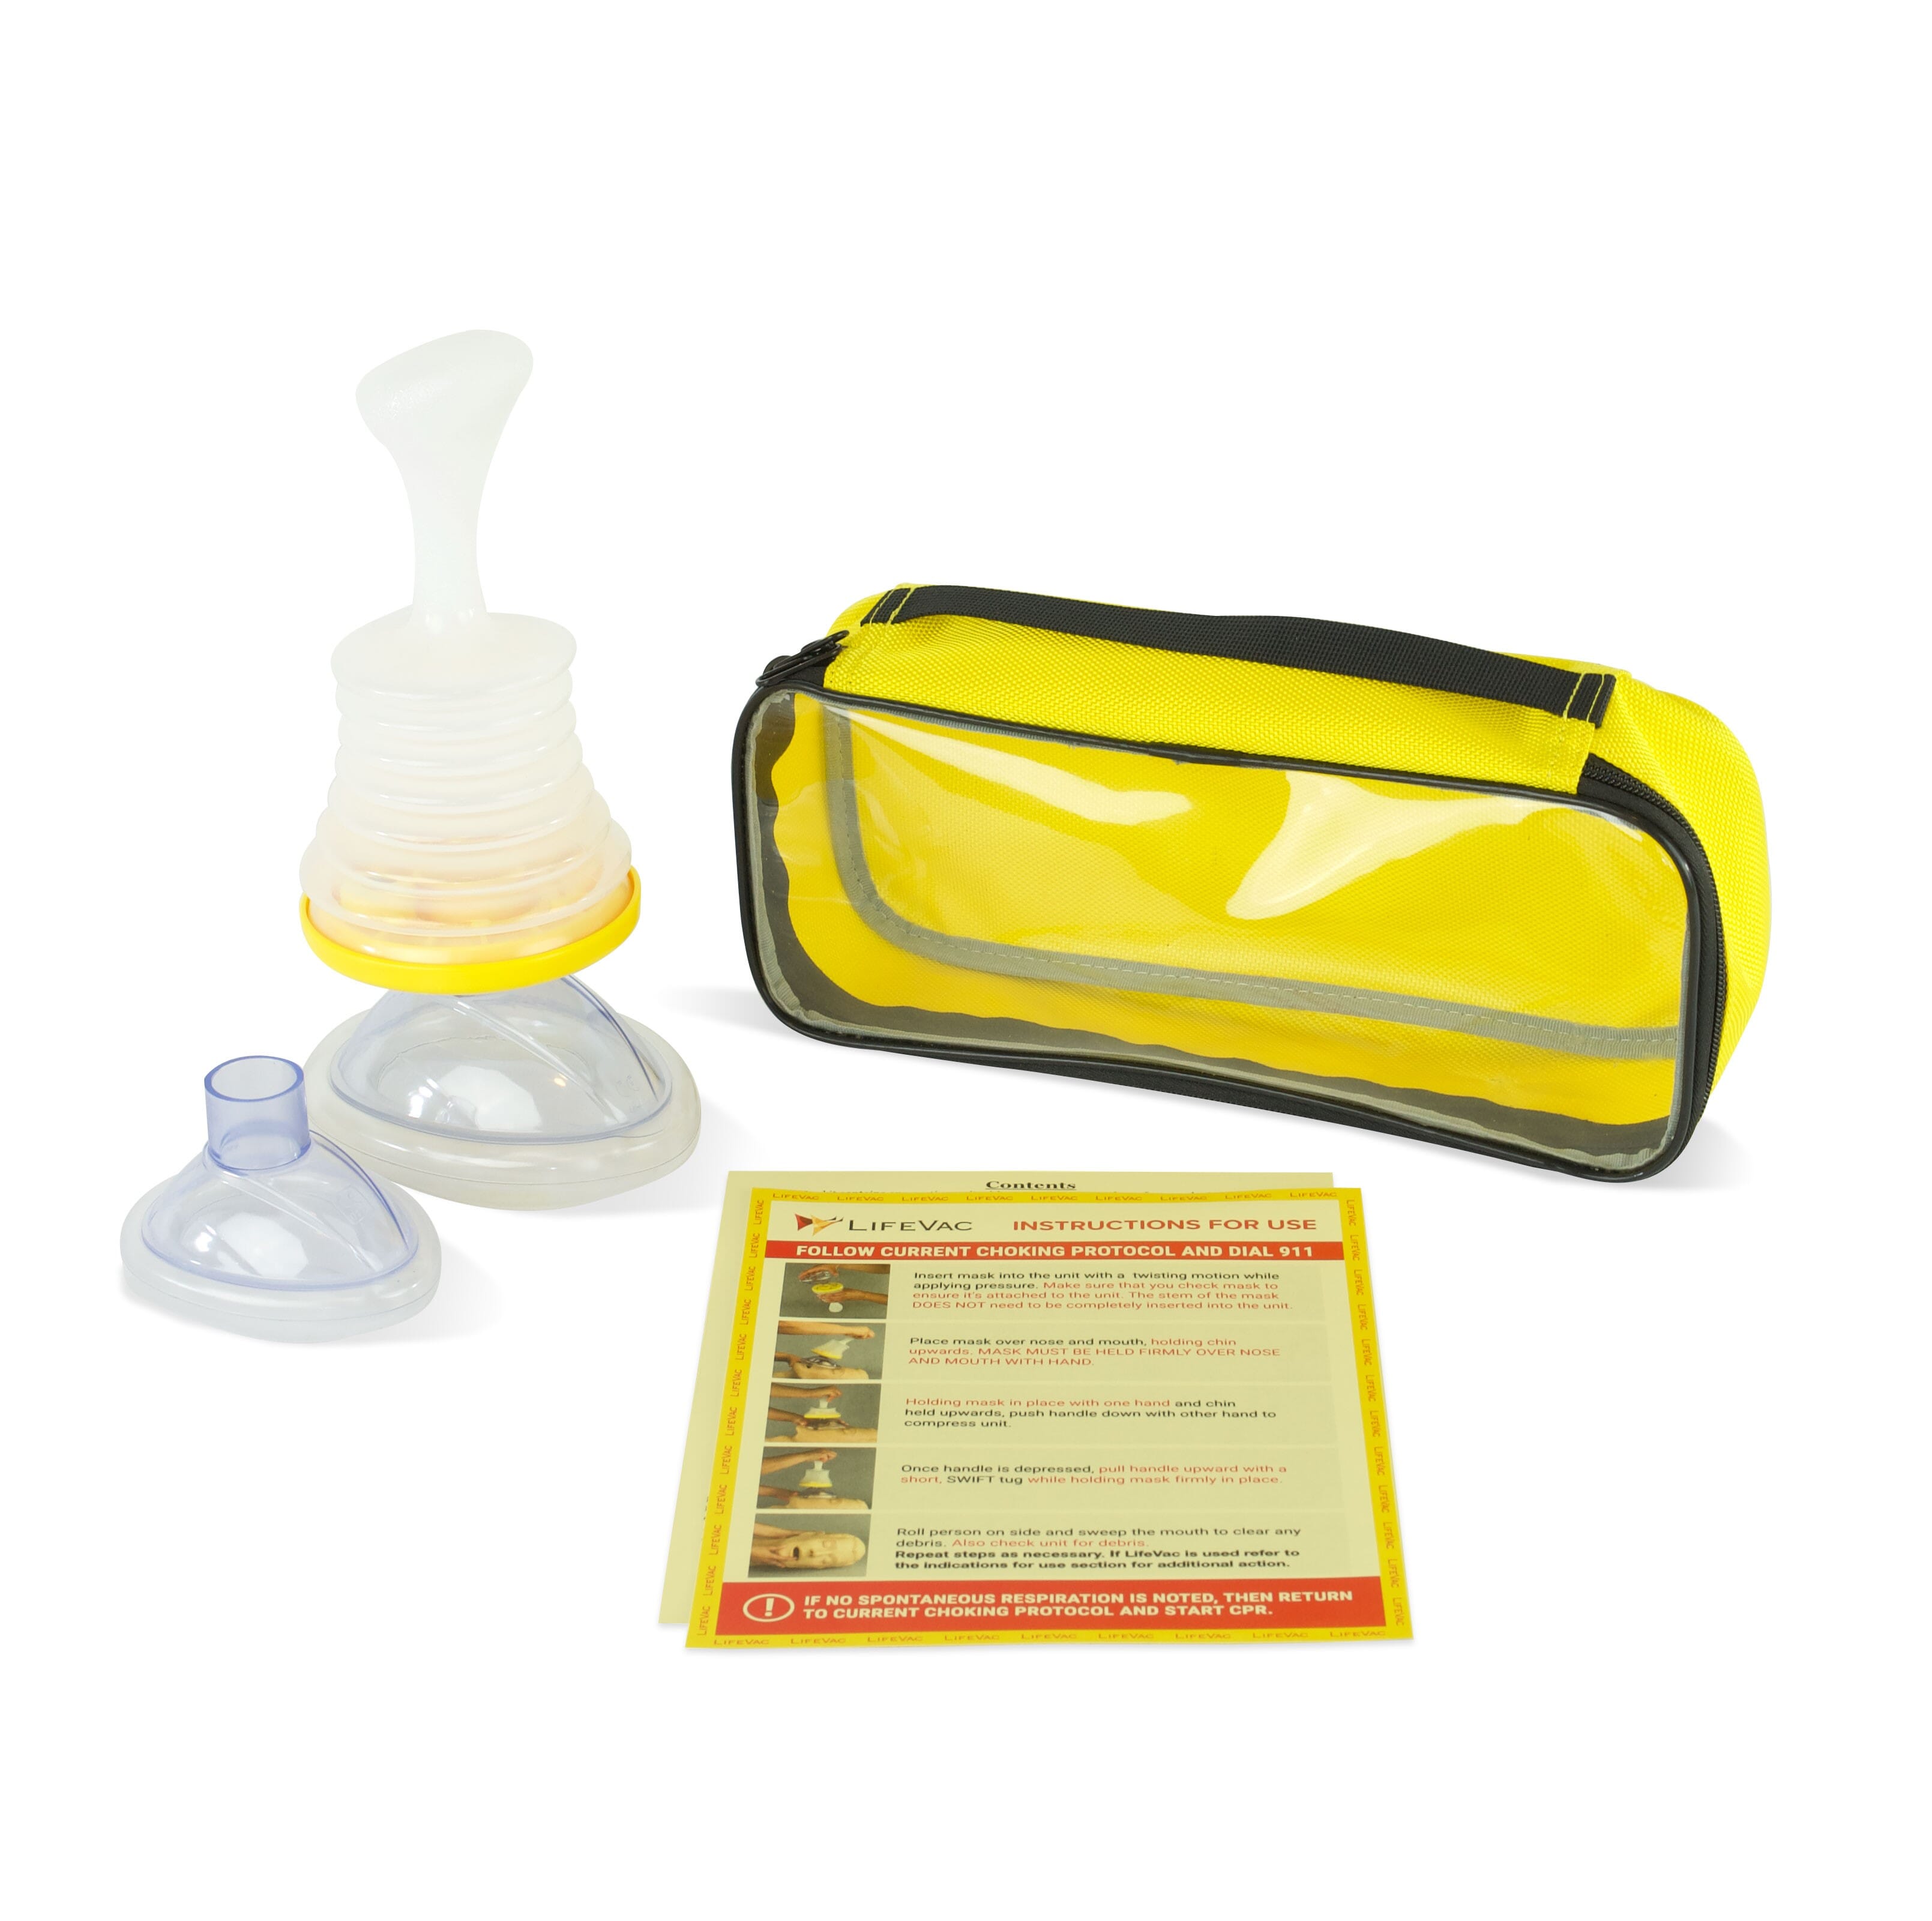 LifeVac airway clearance Travel Kit Product Photo